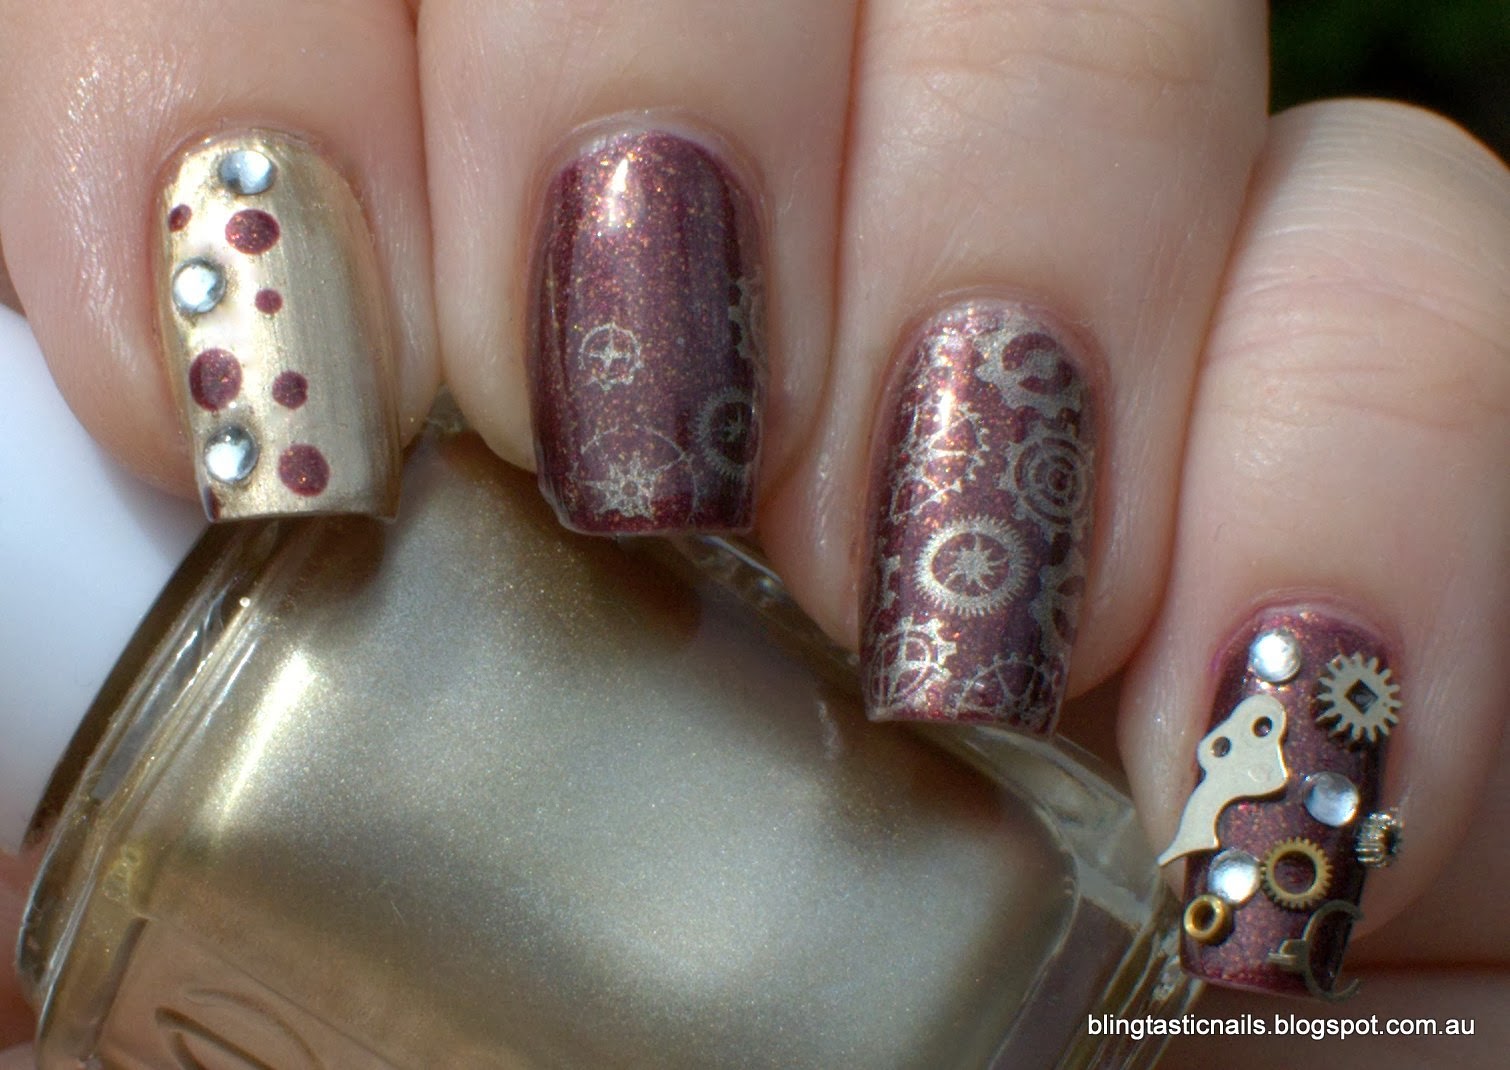 Essie Good as Gold with Aldi Five Star Bron-zite with Bundle Monster stamping and steampunk nail art.